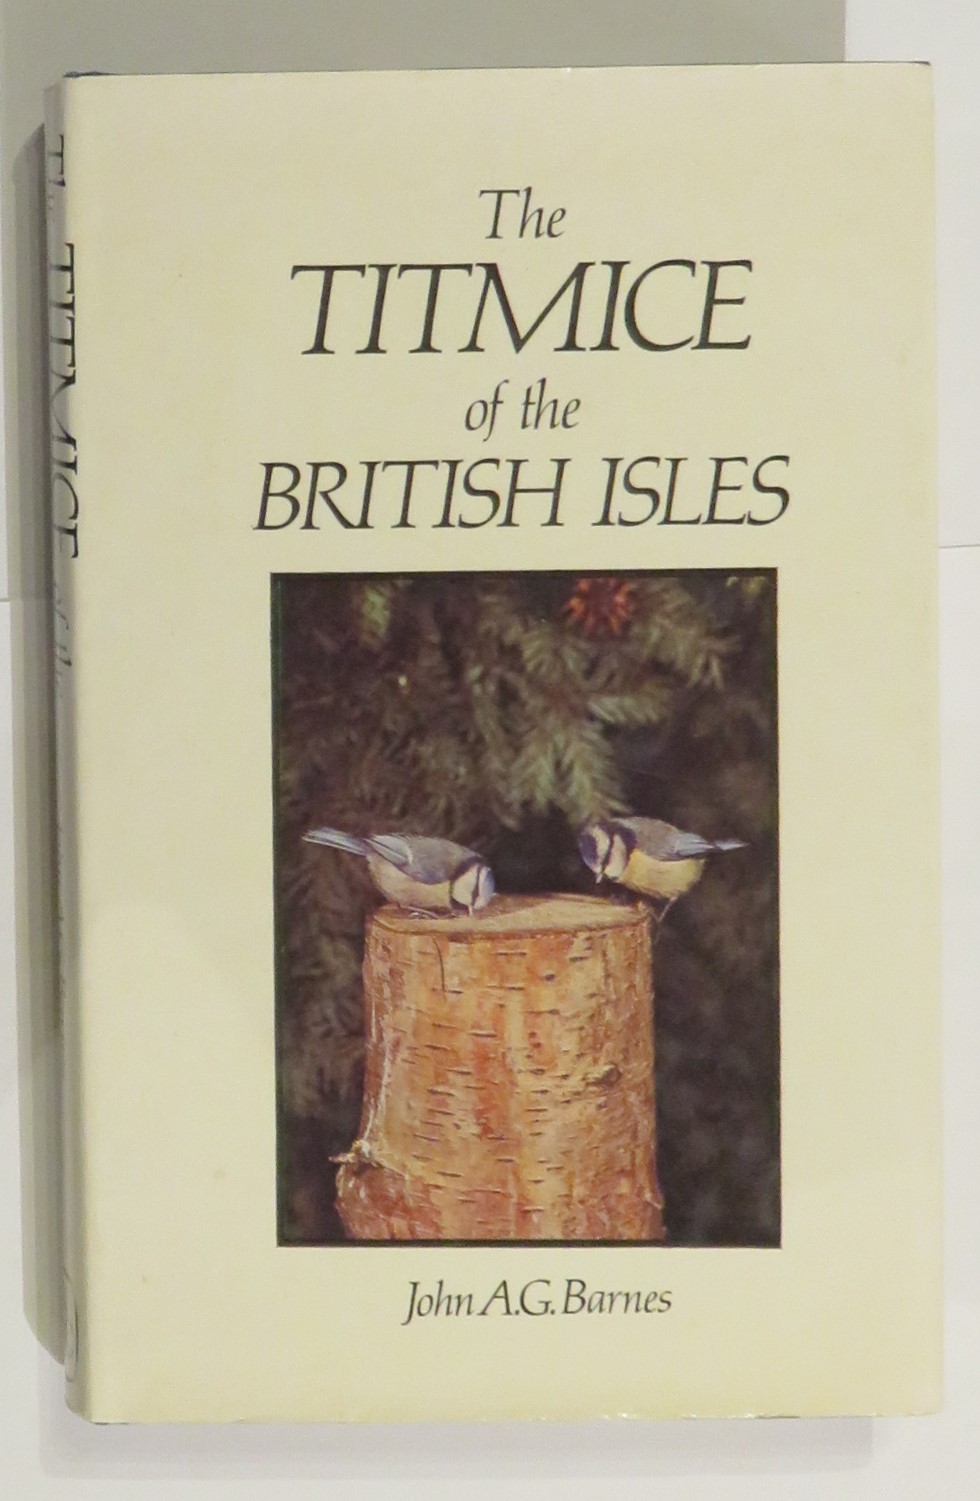 The Titmice of the British Isles